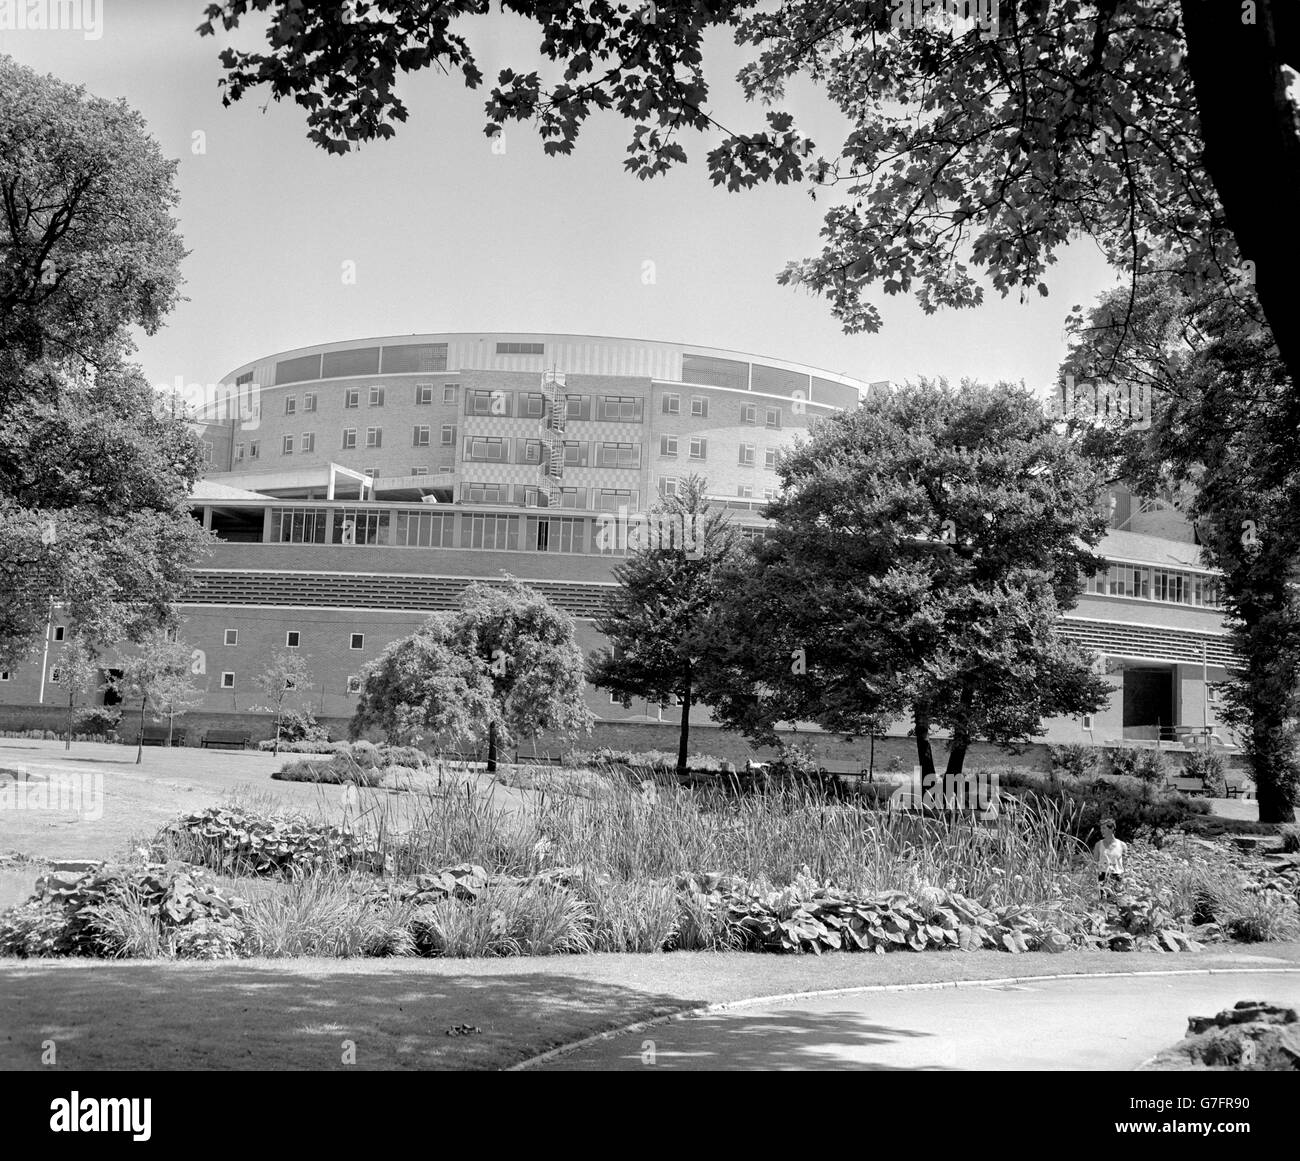 The vast circular building which forms the main block of the British Broadcasting Corporation's 10 million Television Centre in Wood Lane. When finished the building, shaped like a qiant question mark, and designed by Mr Graham Dawbarn, FRIBA, will be Europe's biggest TV centre. Stock Photo